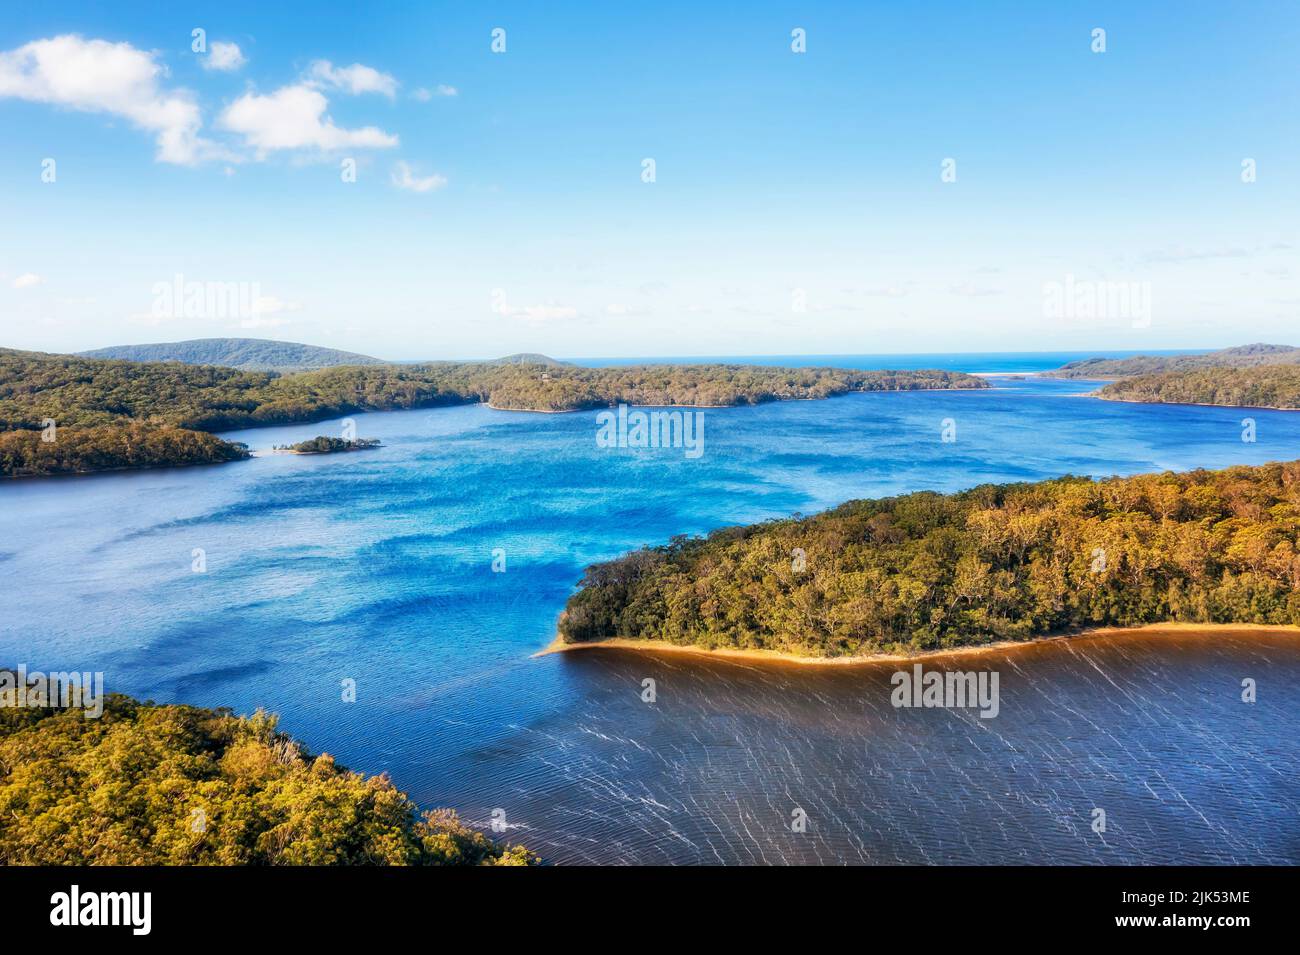 Scenic landscape of Myalls Lake National park in Australia on Pacific ocean coast - aerial view. Stock Photo